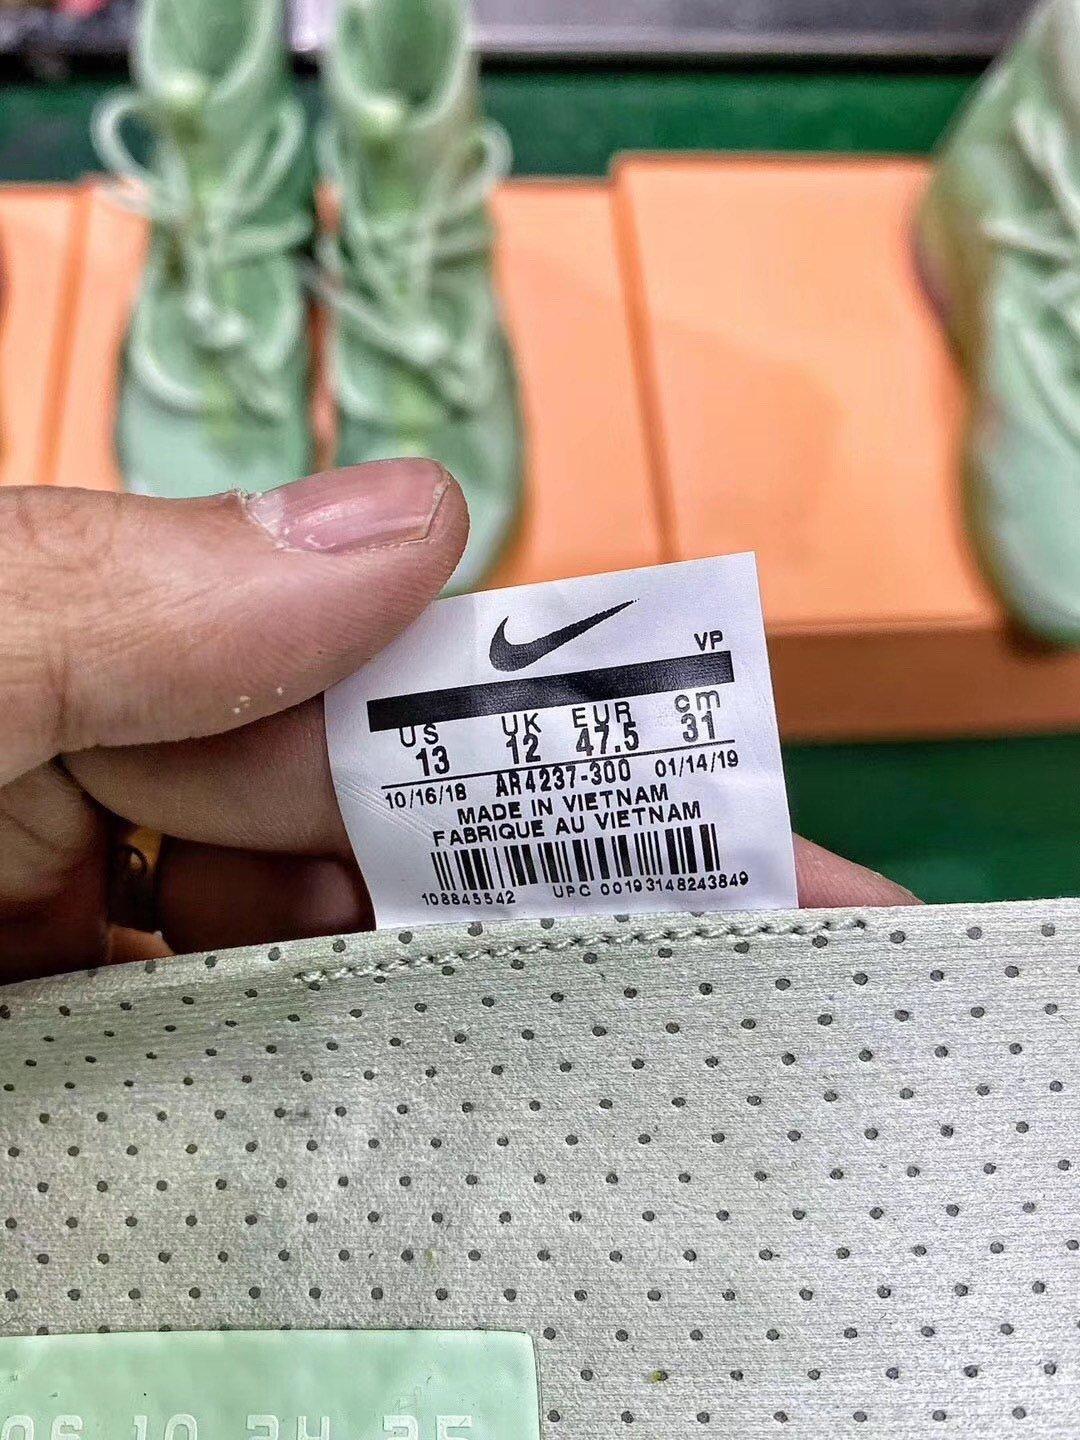 Air Fear of God 1 Green Perfect Version Released